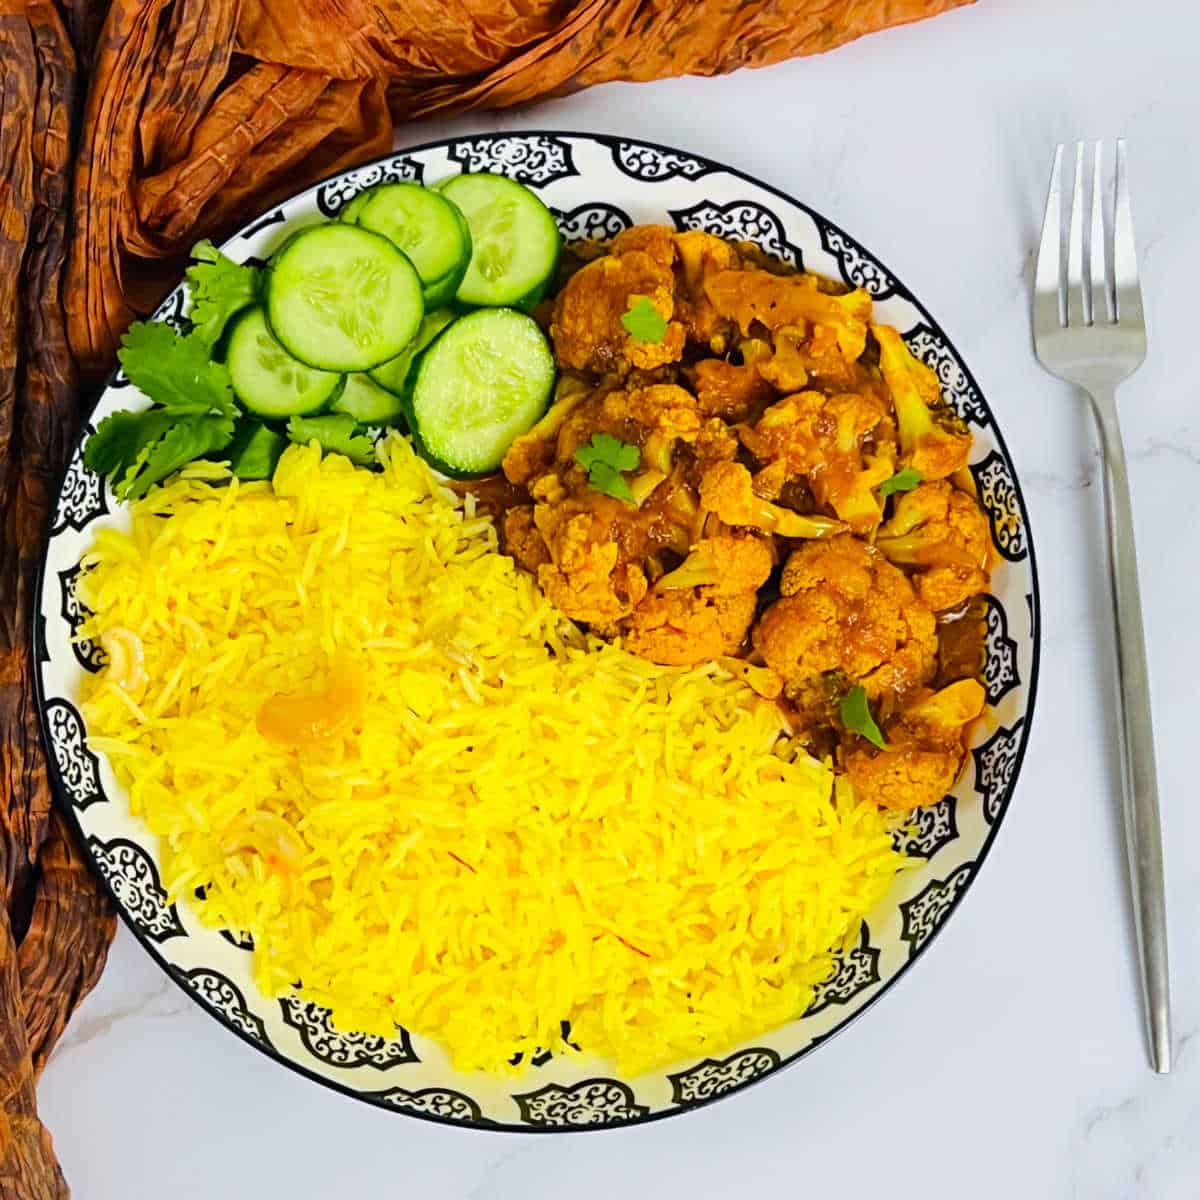 Saffron rice served with cauliflower curry and salad on a white plate.